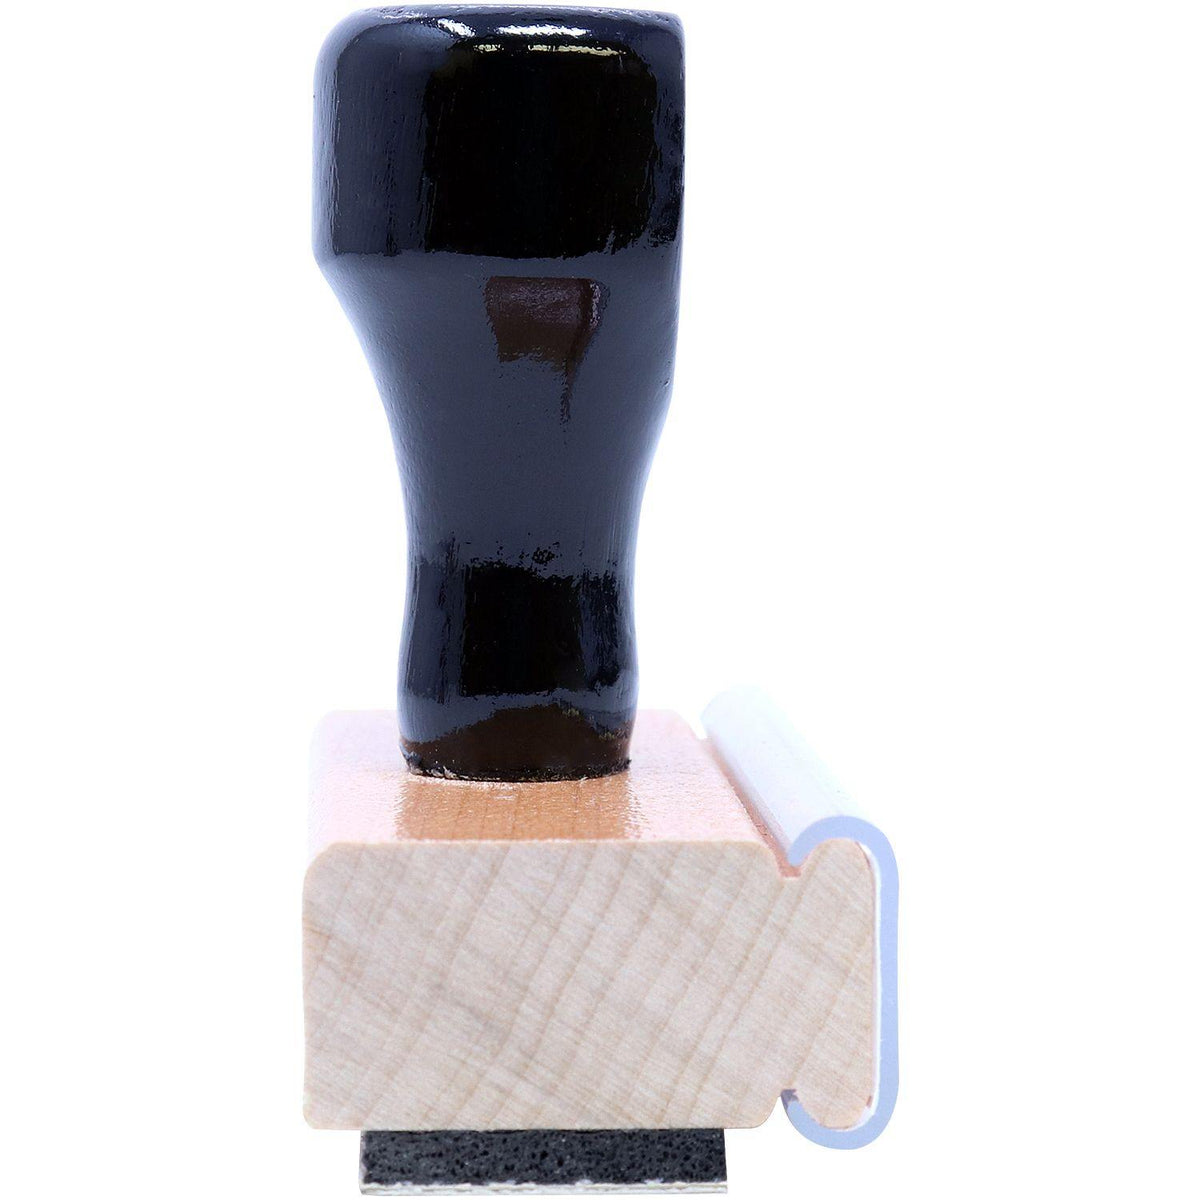 Round COD Rubber Stamp - Engineer Seal Stamps - Brand_Acorn, Impression Size_Small, Stamp Type_Regular Stamp, Type of Use_General, Type of Use_Office, Type of Use_Shipping &amp; Receiving